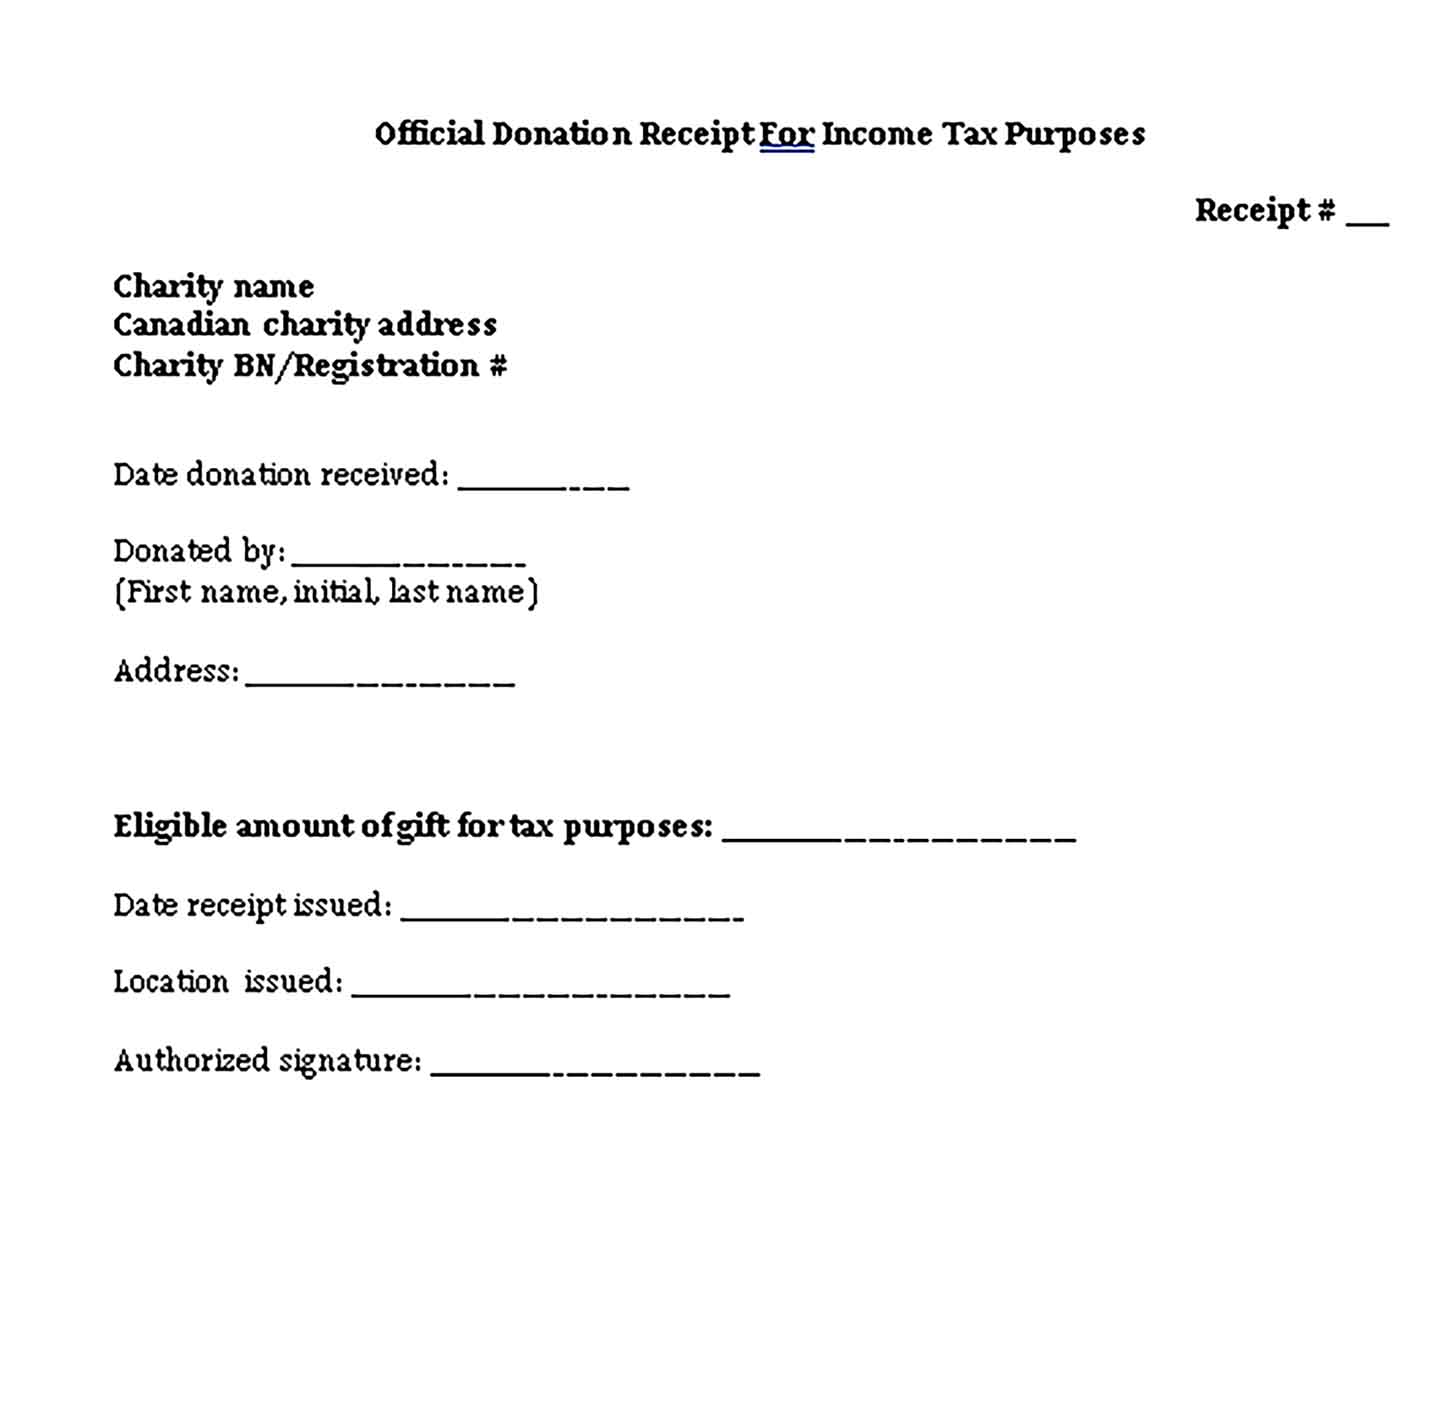 Sample Official Donation Receipt For Income Tax Purposes Templates